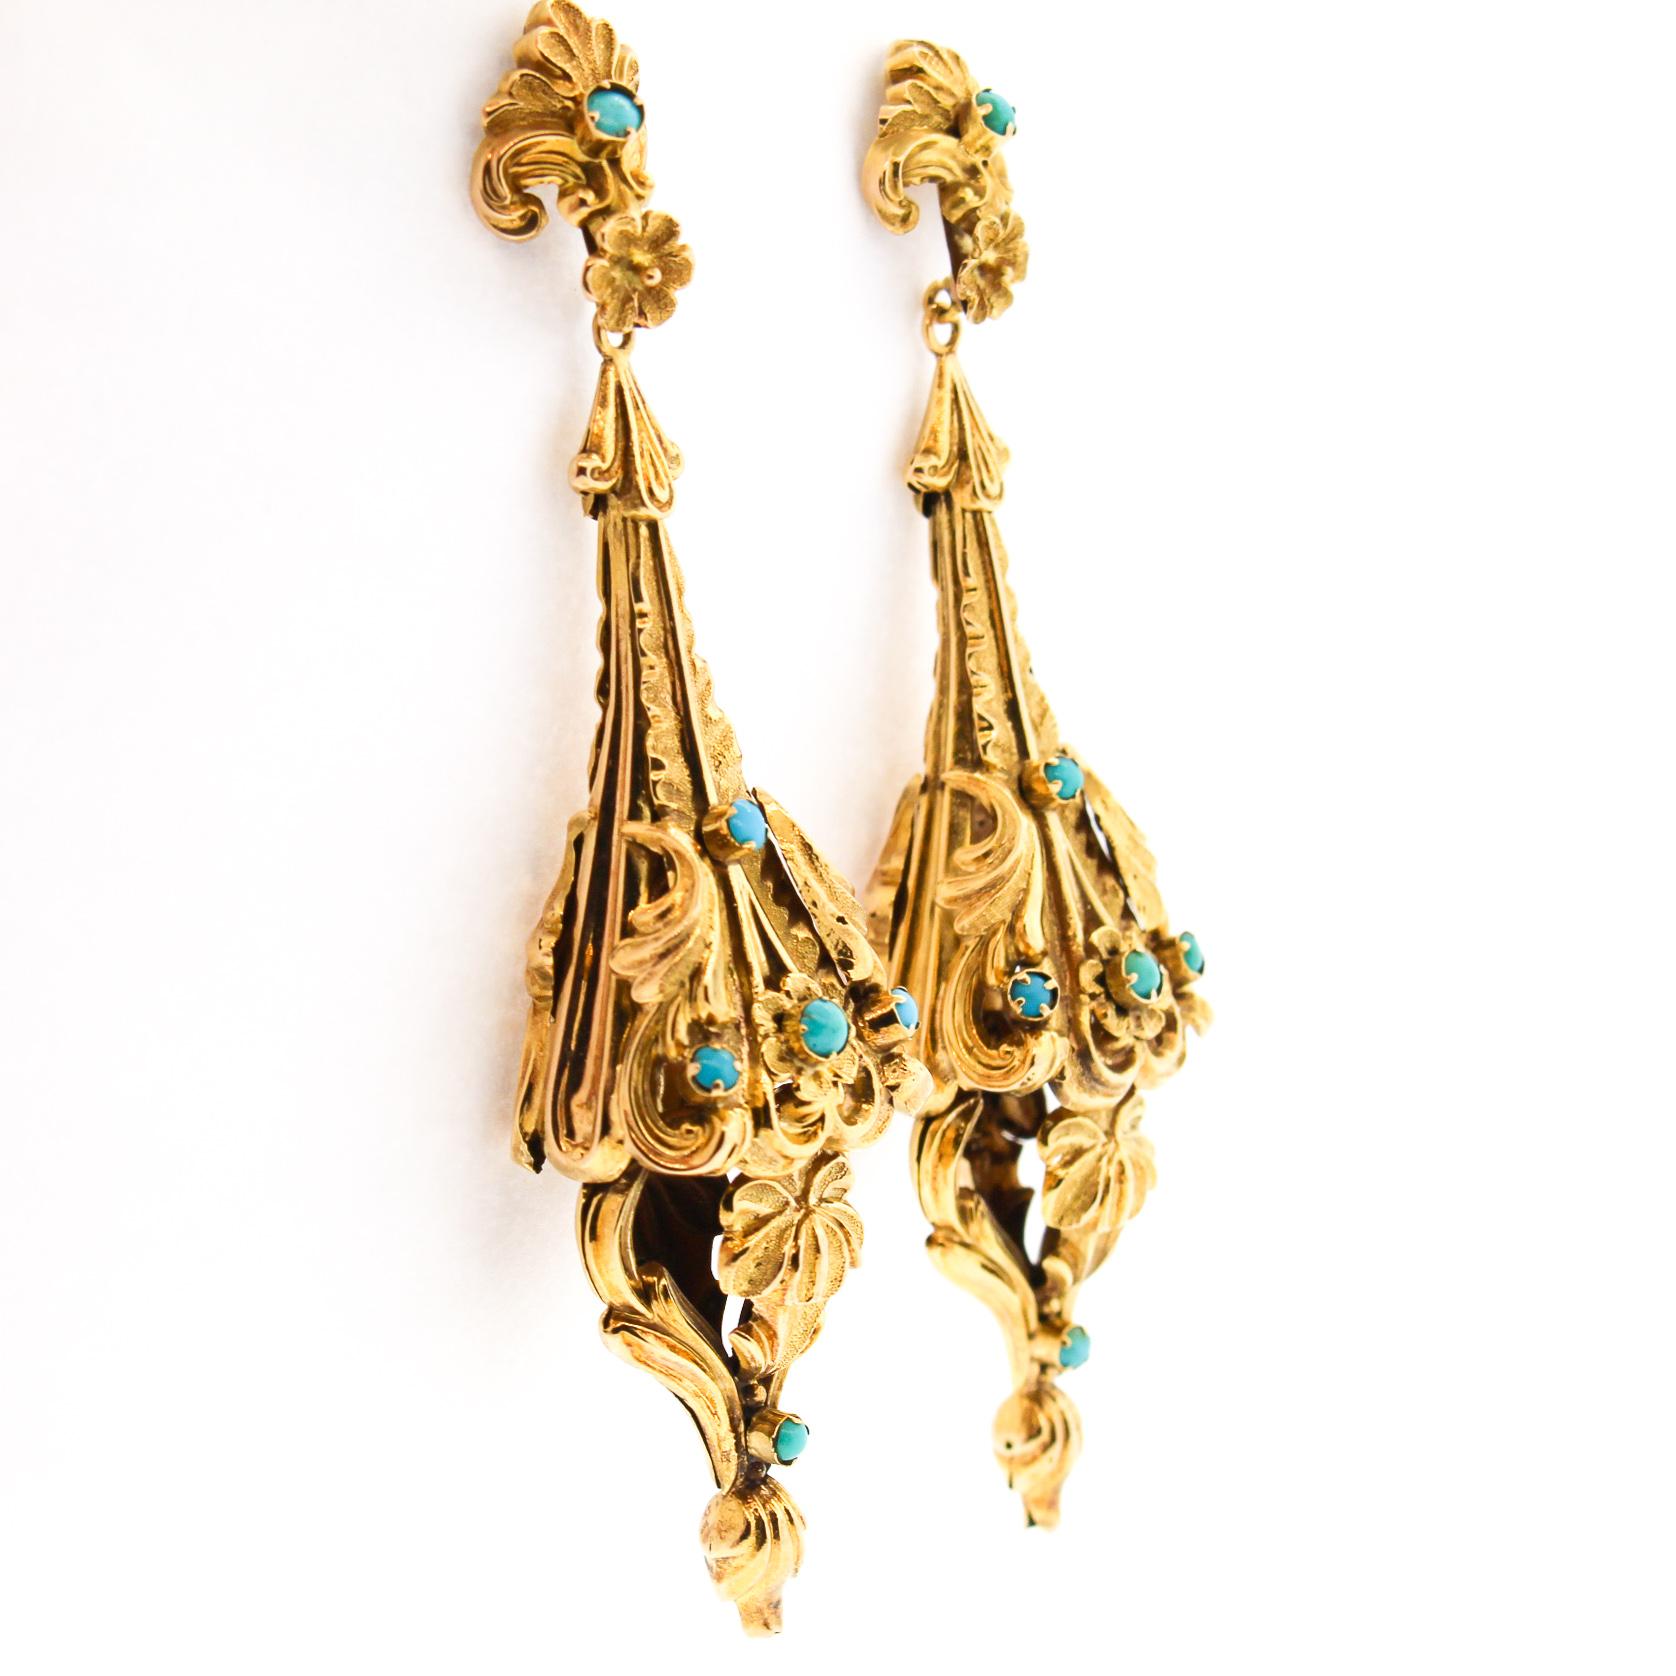 A pair of dramatic Victorian turquoise 14k yellow gold repousse pendant earrings likely made in the United States around 1880. The long dimensional earrings are in incredible condition as it has no dents or hasn't been crushed in all these years.